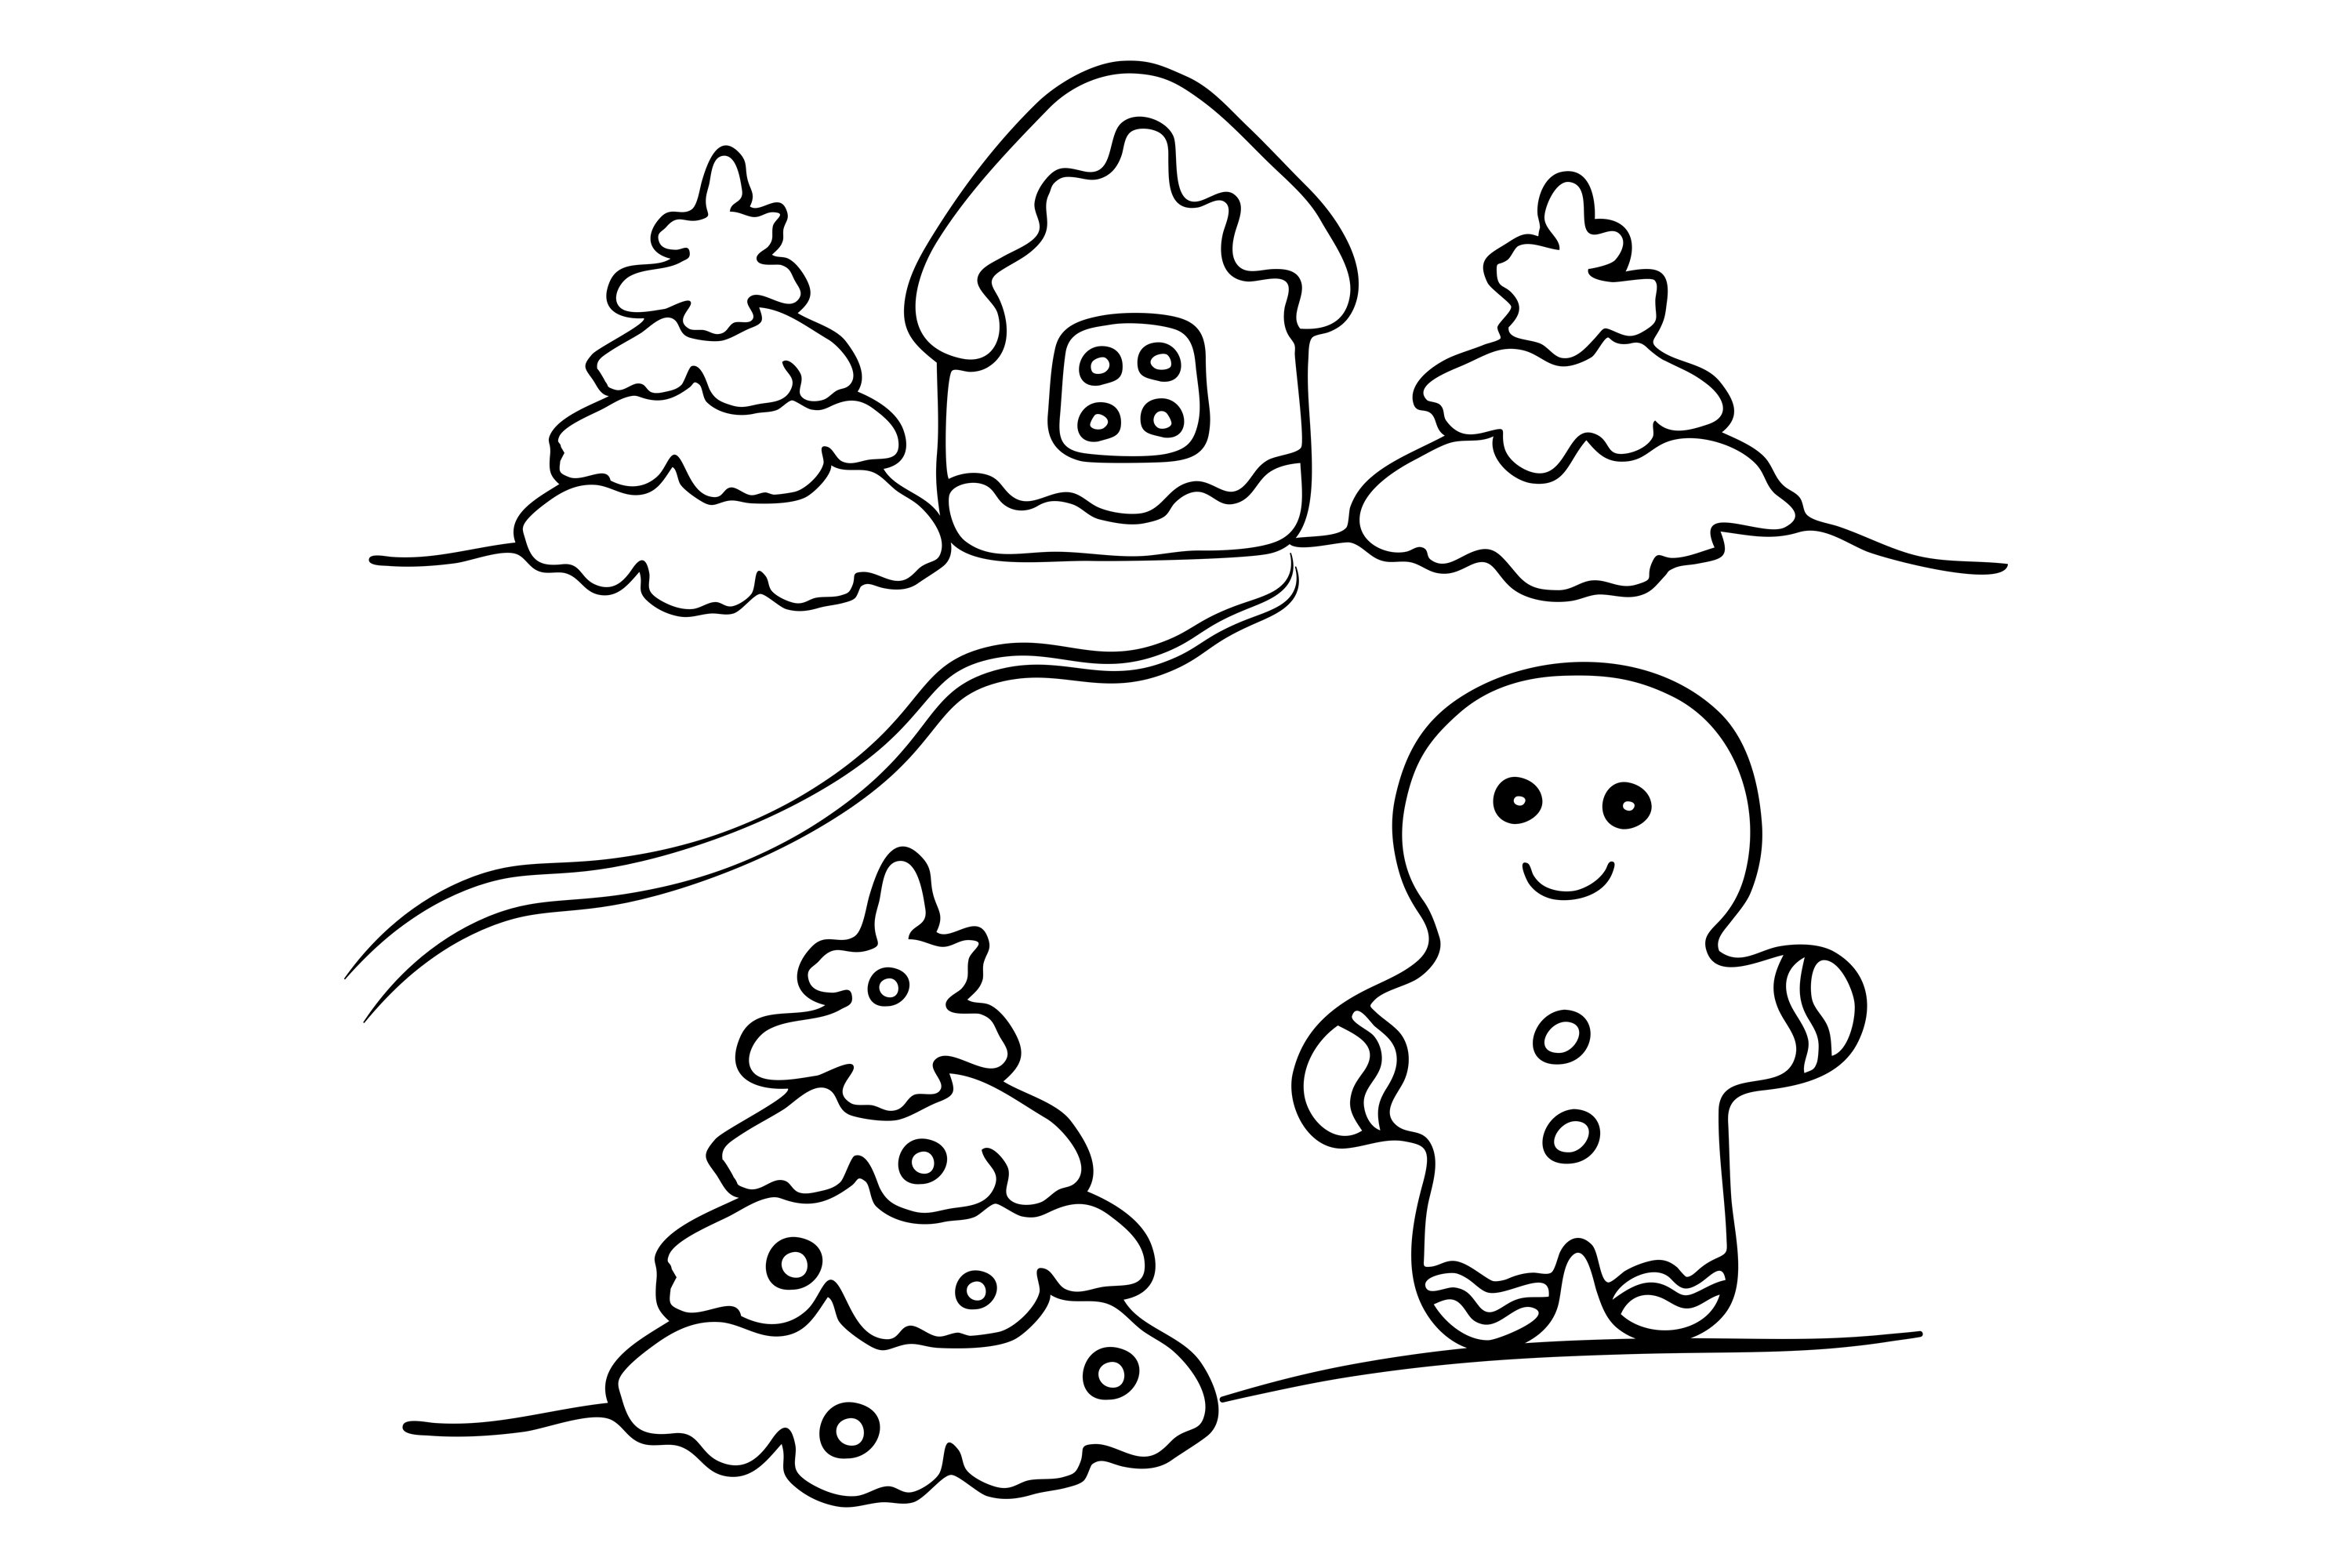 Gingerbread house gingerbread man coloring book